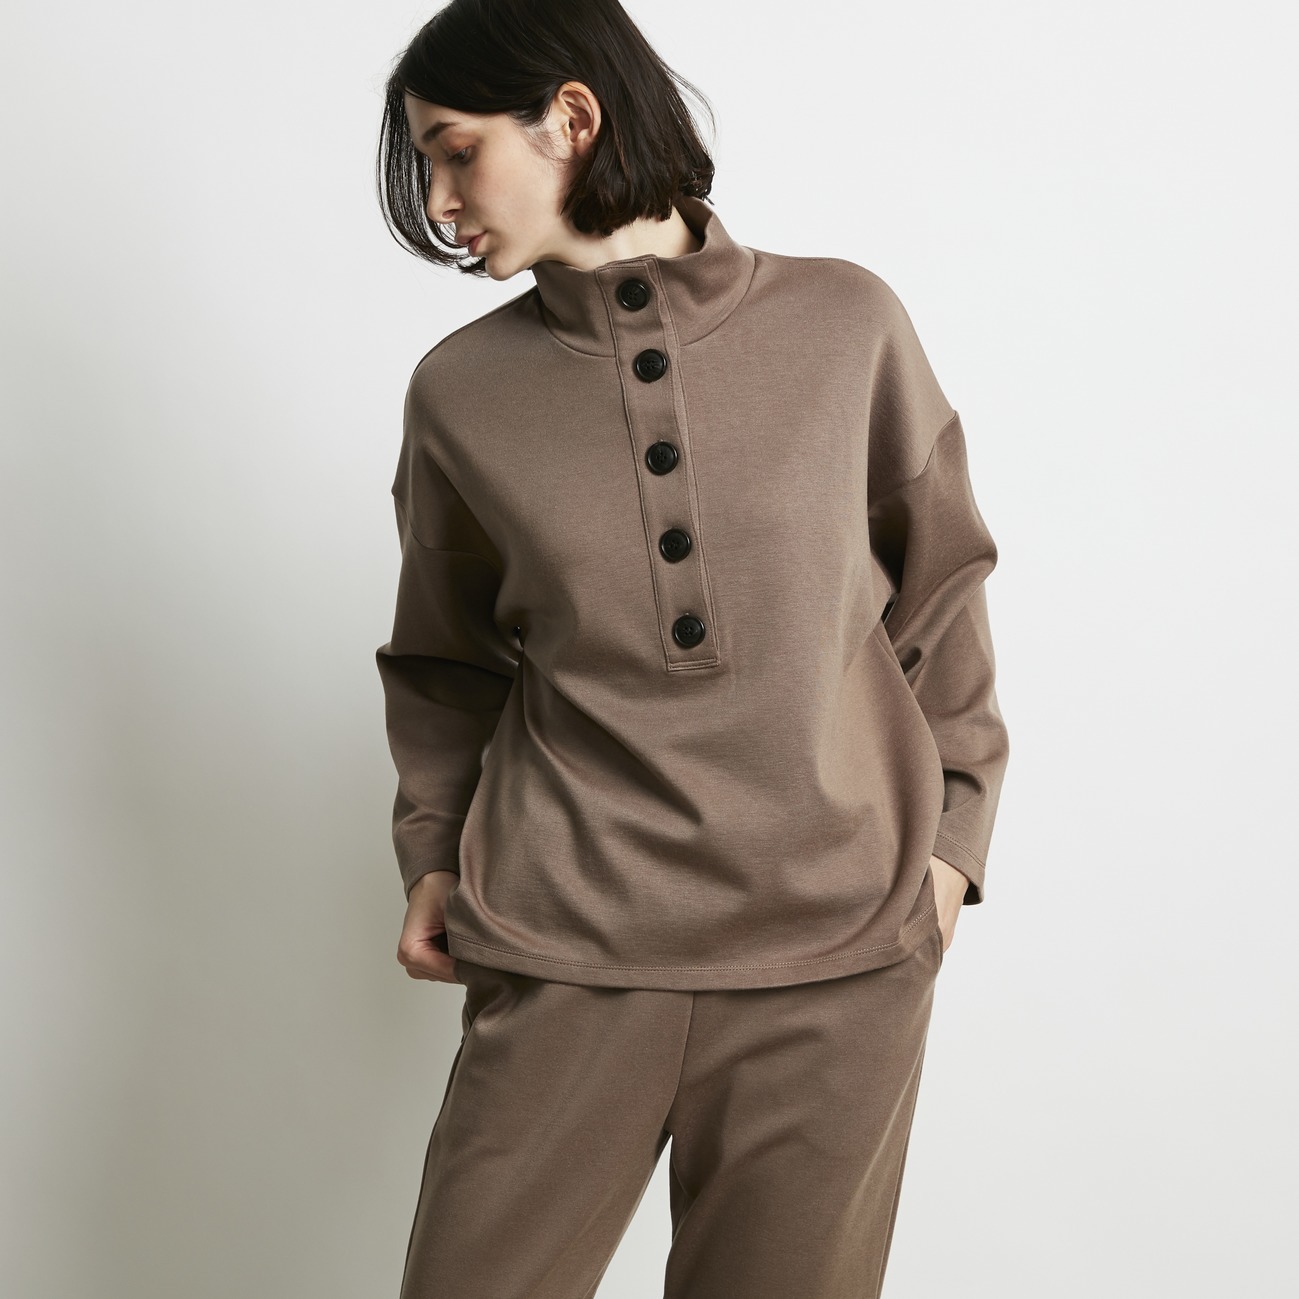 WOOL JERSEY STAND NECK PO 詳細画像 ダークブラウン 13